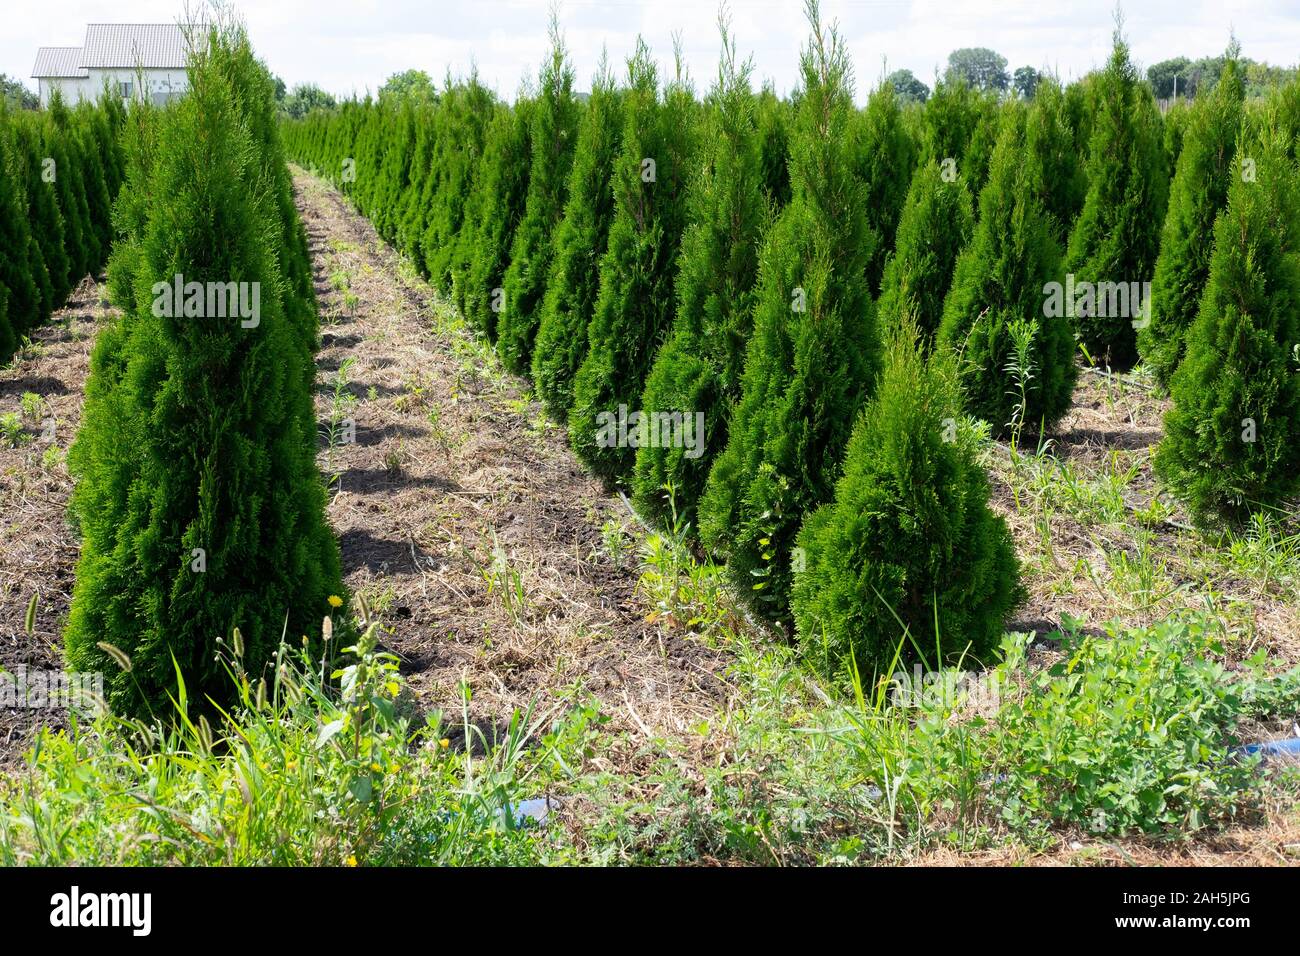 Plant nursery. Coniferous trees on the beds that are grown for sale and decoration of lawns Stock Photo